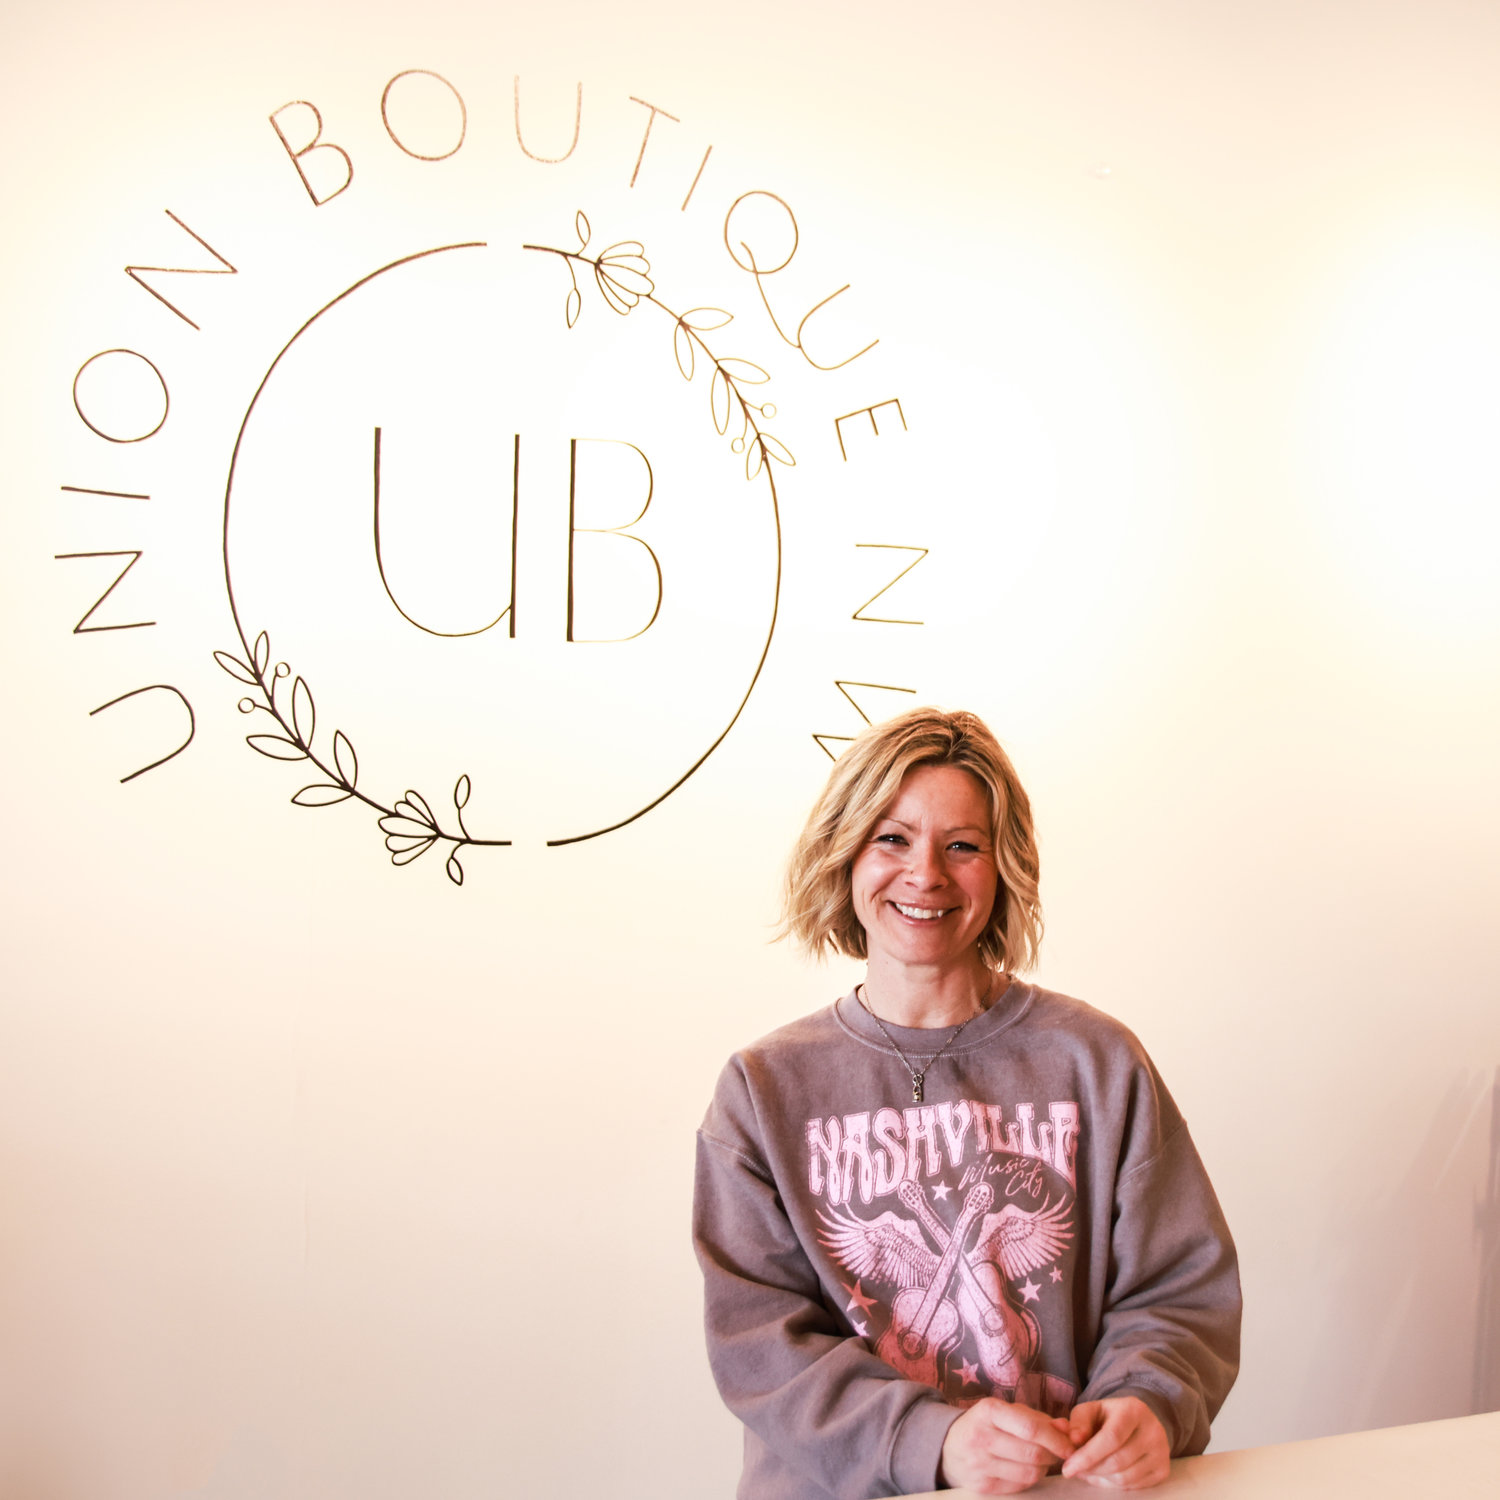 Union Boutique NW is owned by Noelle Cresap and operated by herself and her daughters. Noelle Cresap is seen here on Tuesday, March 7.